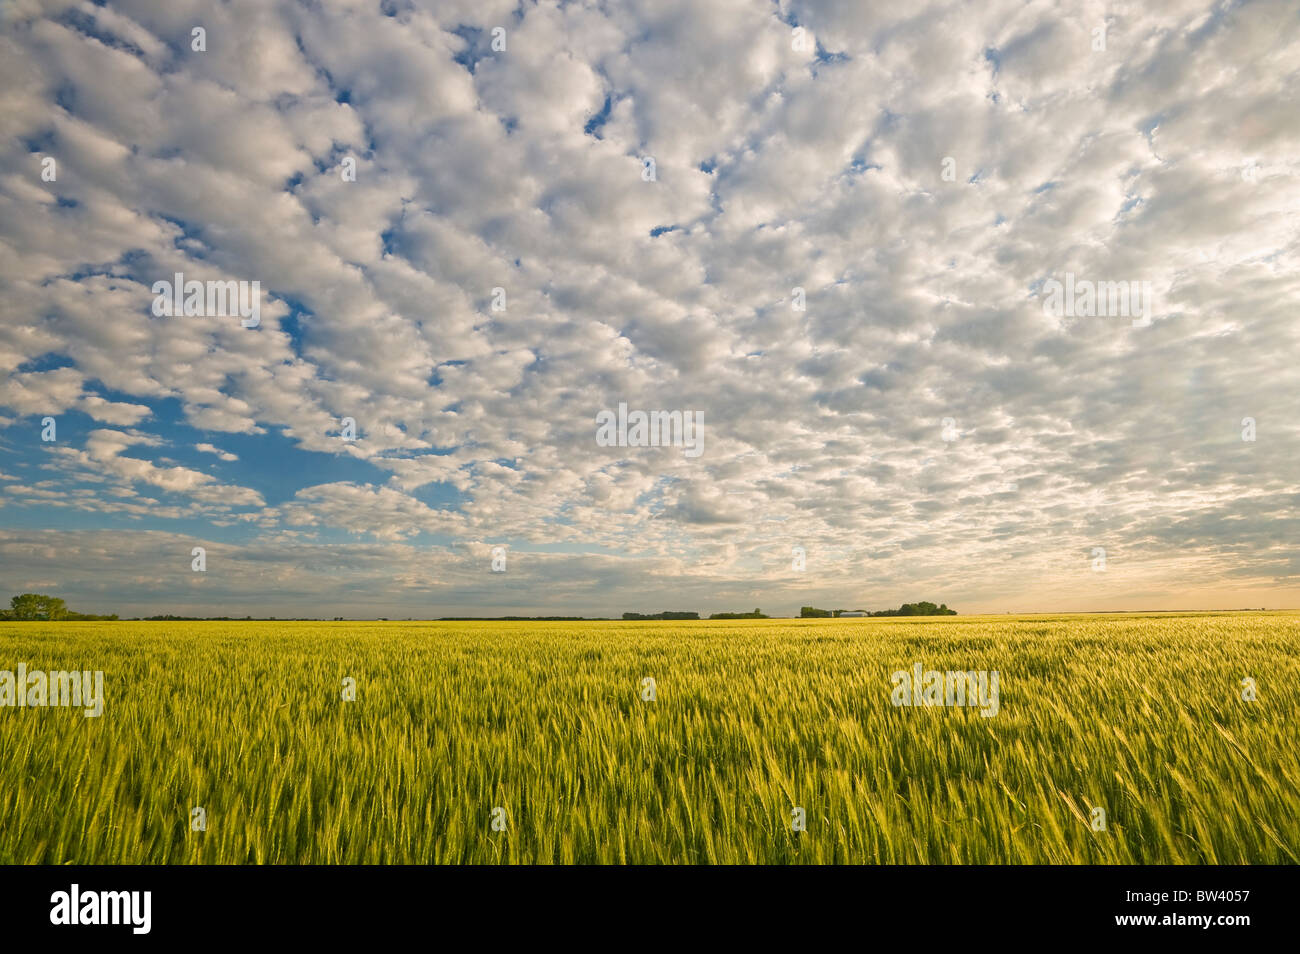 Mid-growth headed out barley field and sky filled with clouds, near Niverville, Manitoba, Canada Stock Photo